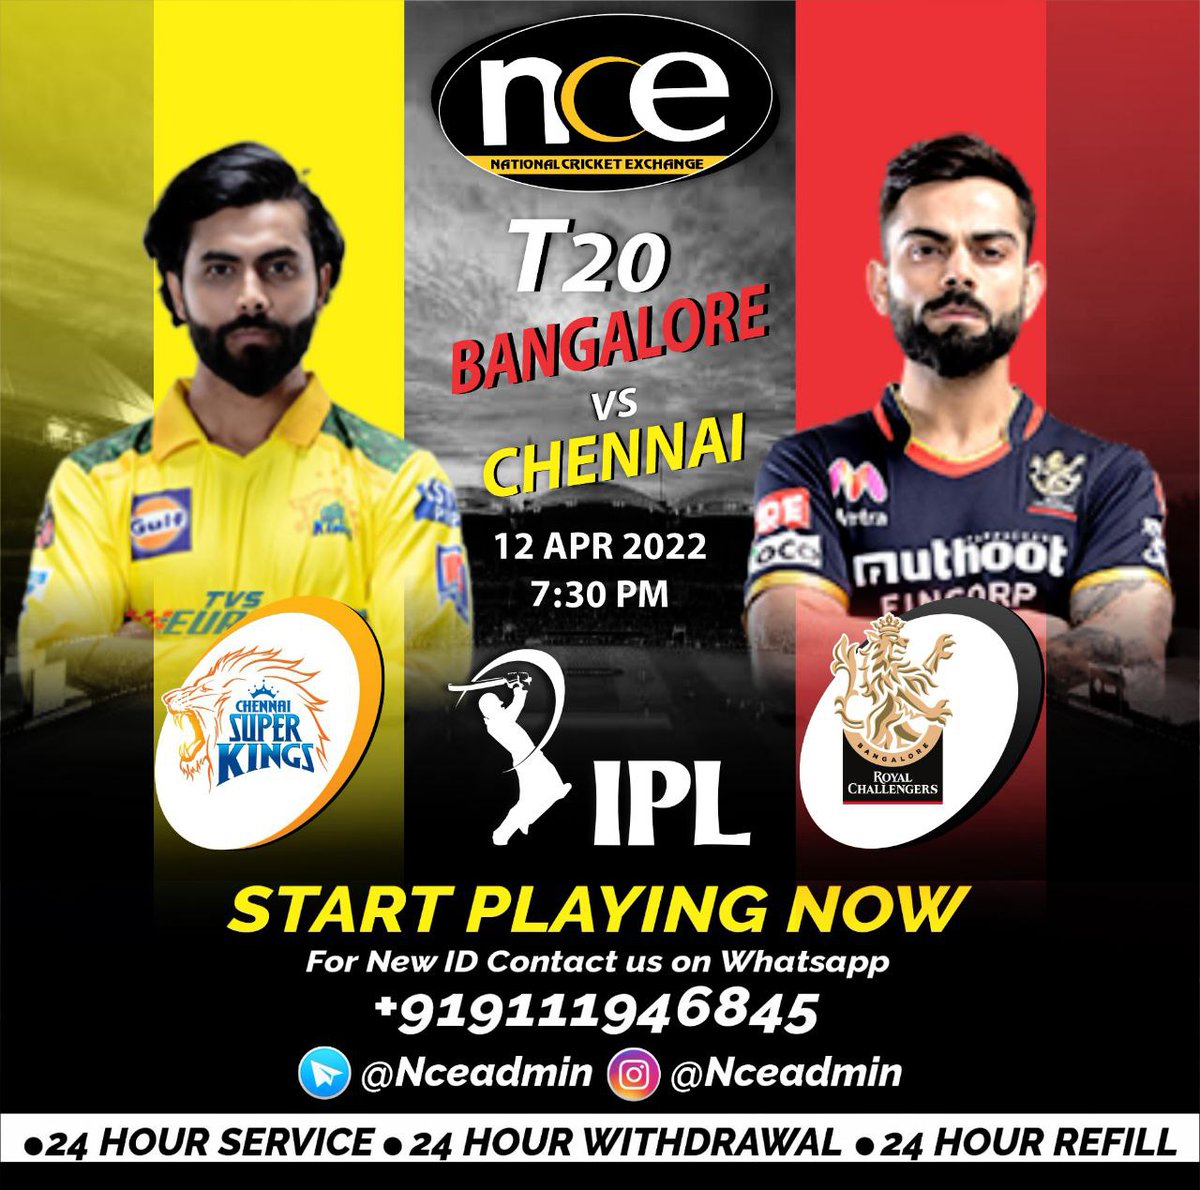 🏏  TODAY'S IPL SCHEDULE 🏏

#CHENNAIvsBANGALORE|7:30PM
Chennai Super Kings will square off with Royal Challengers Bangalore in the 22nd match of IPL 2022 on Tuesday.

Bet live on all the action with us!  
Contact us on whatsapp for new 🆔 !
wa.me/+919111946845